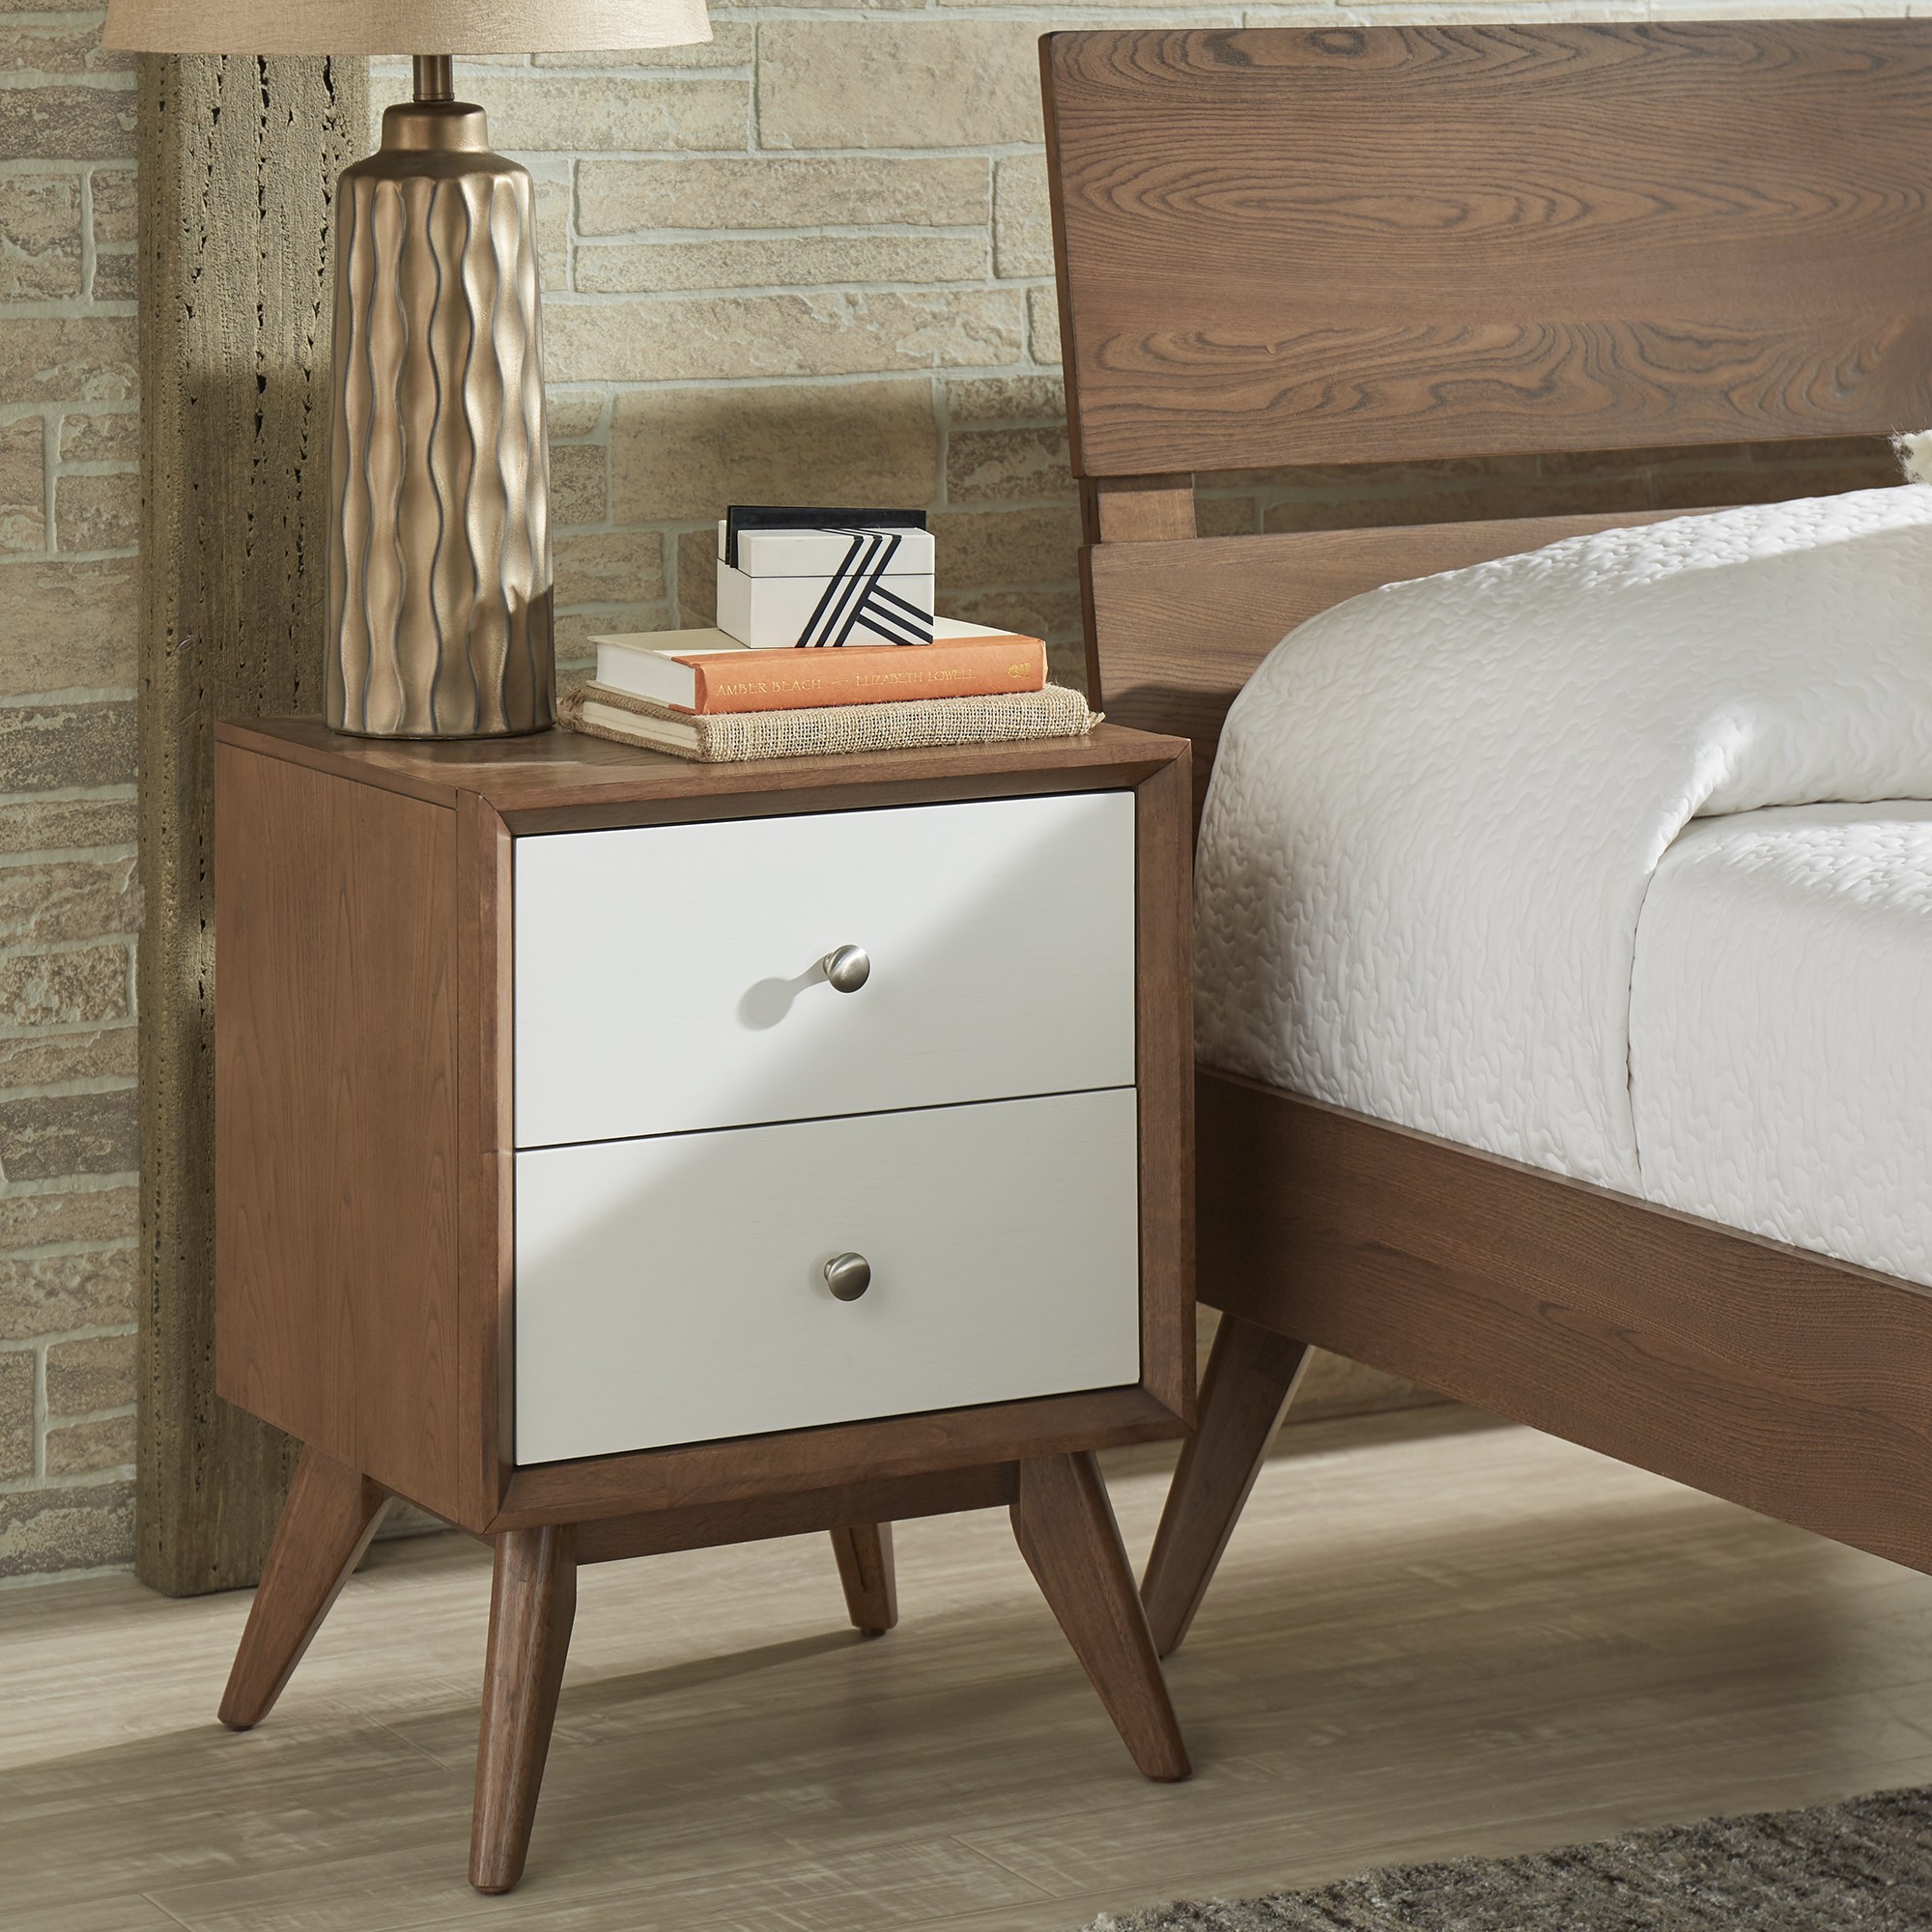 sylvia mid century white and walnut drawer nightstand inspire modern metal accent table free shipping today target toddler bedding dining room doors indoor nautical ceiling lights